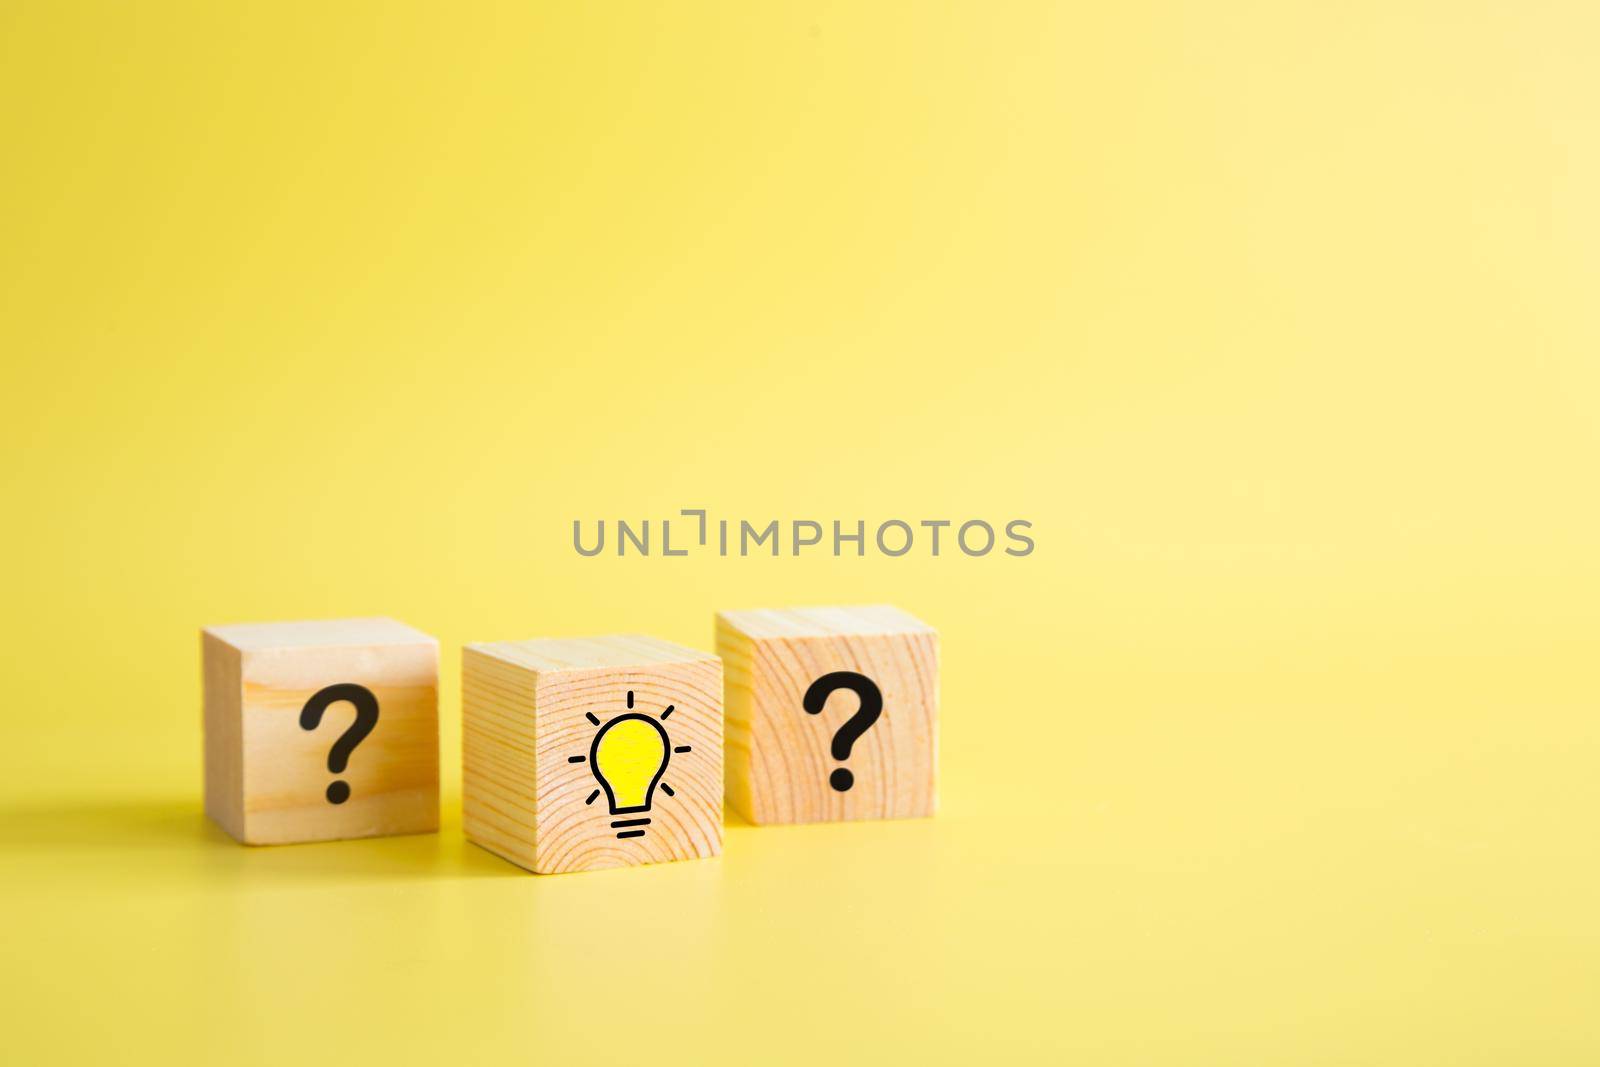 Lightbulb icon and question mark print screen on wooden block cube. It is creative thinking idea and innovation concept.